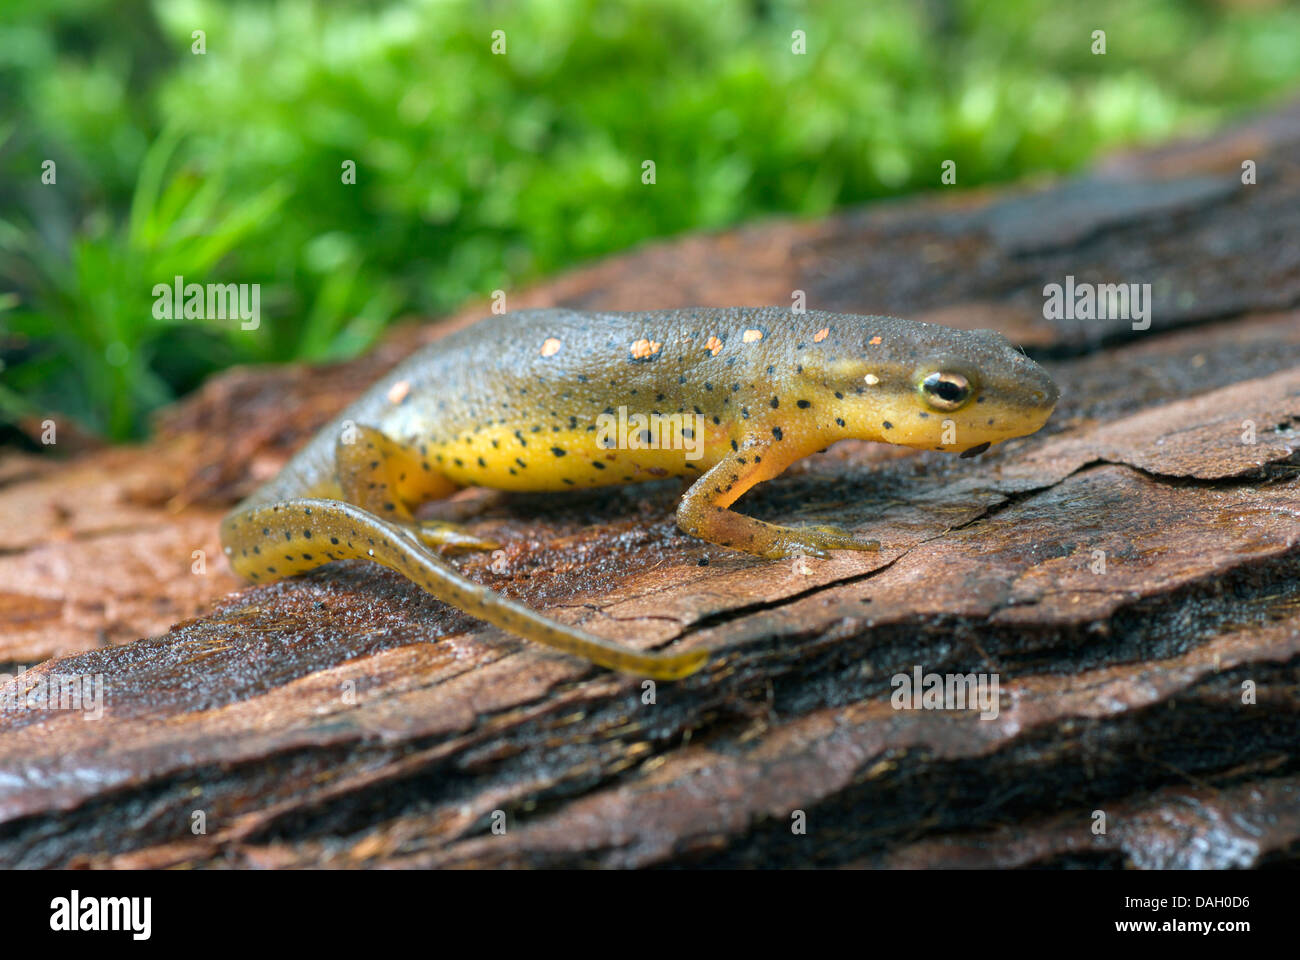 eft, red-spotted newt, red eft, eastern newt (Notophthalmus viridescens), on a stone Stock Photo